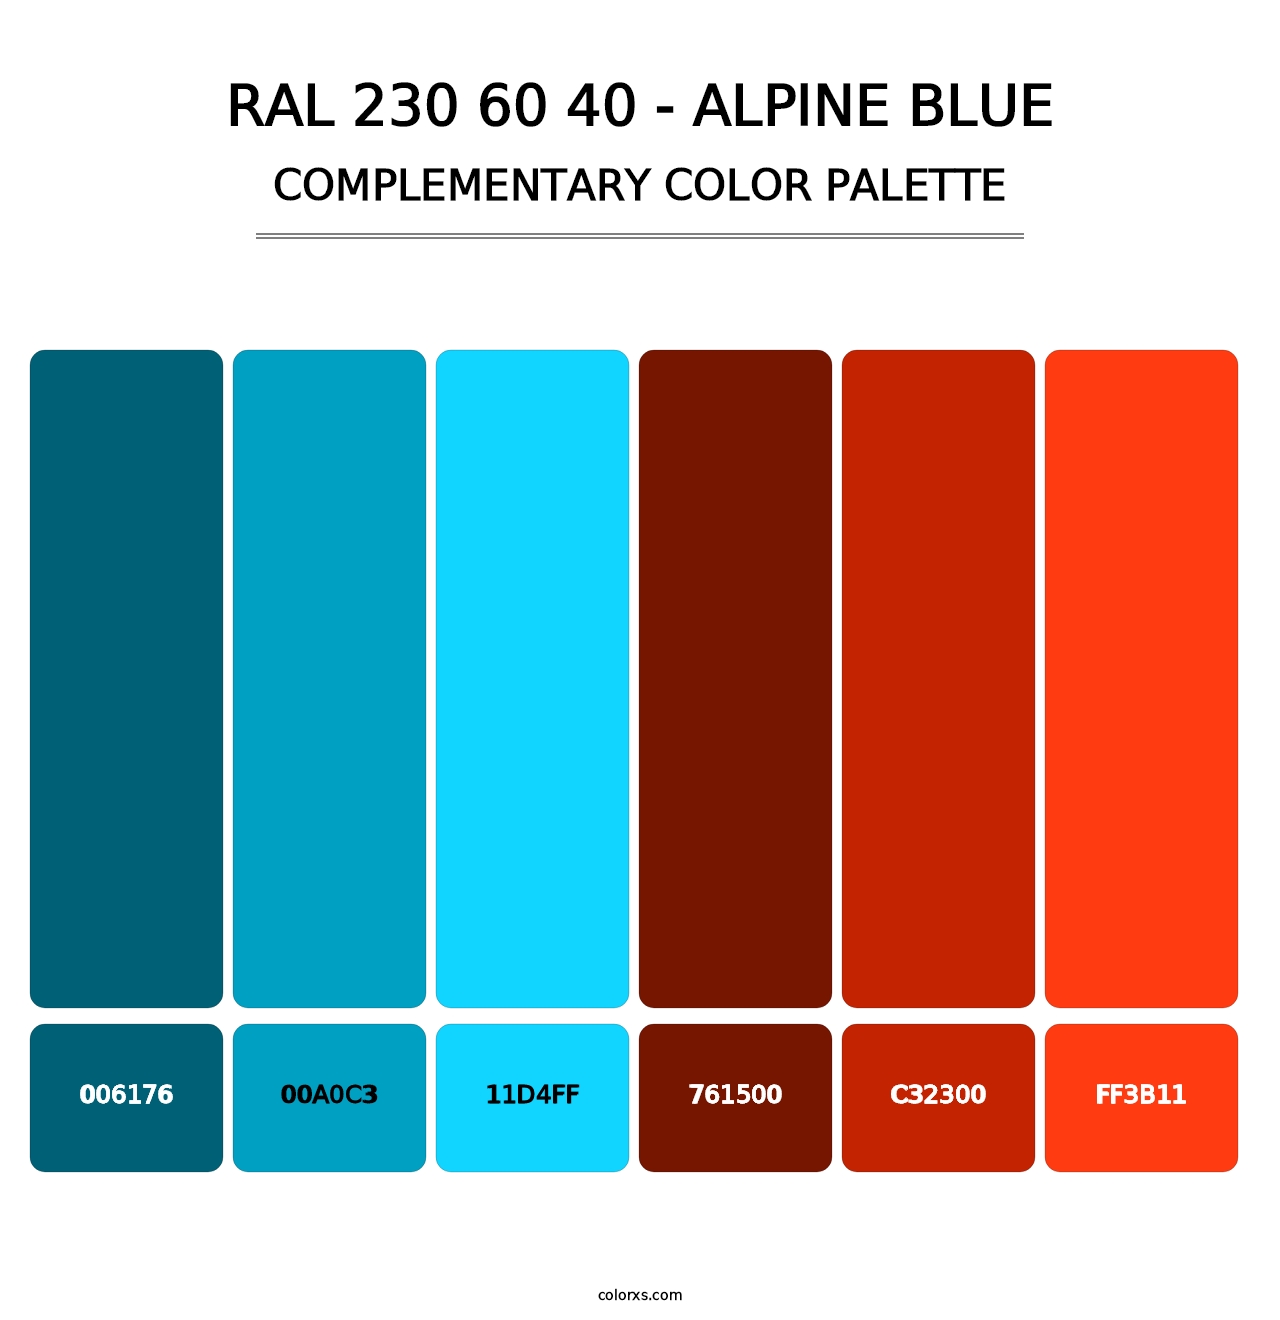 RAL 230 60 40 - Alpine Blue - Complementary Color Palette